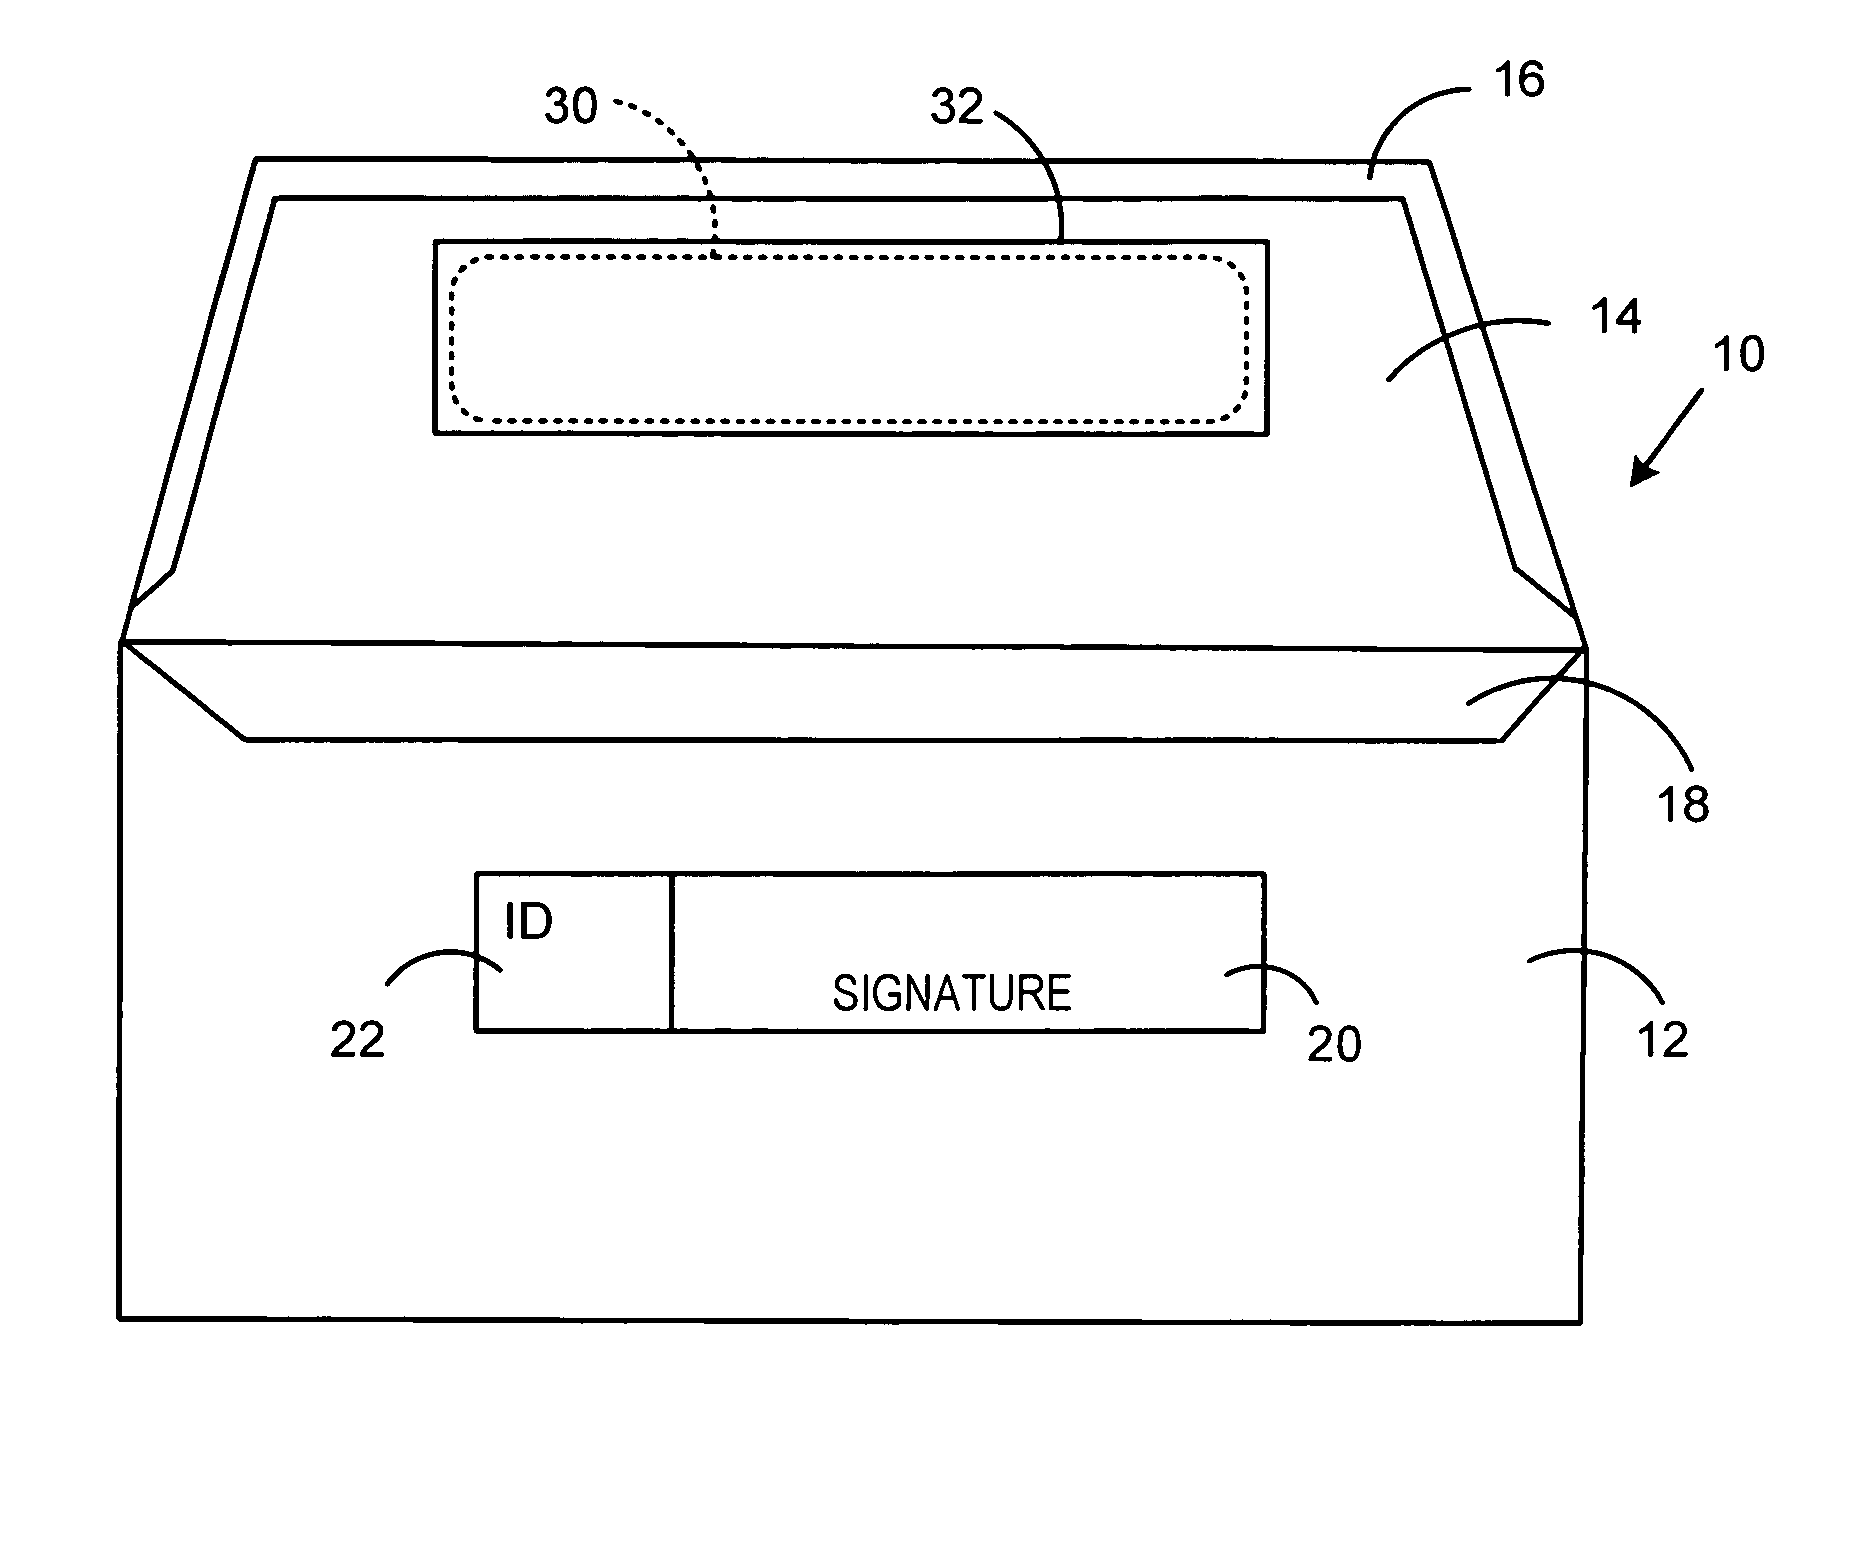 Method and system for protecting privacy of signature on mail ballot utilizing optical shutter